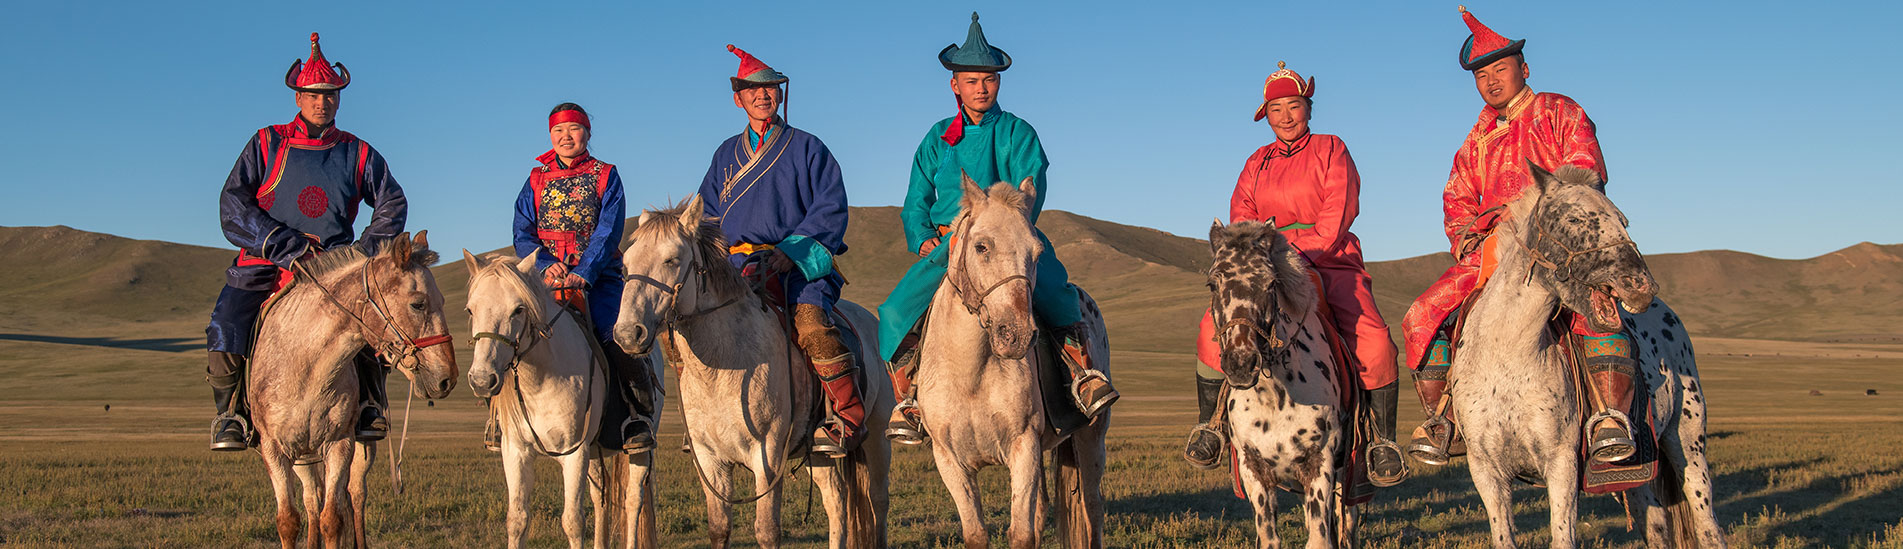 Horses and riding in Mongolia